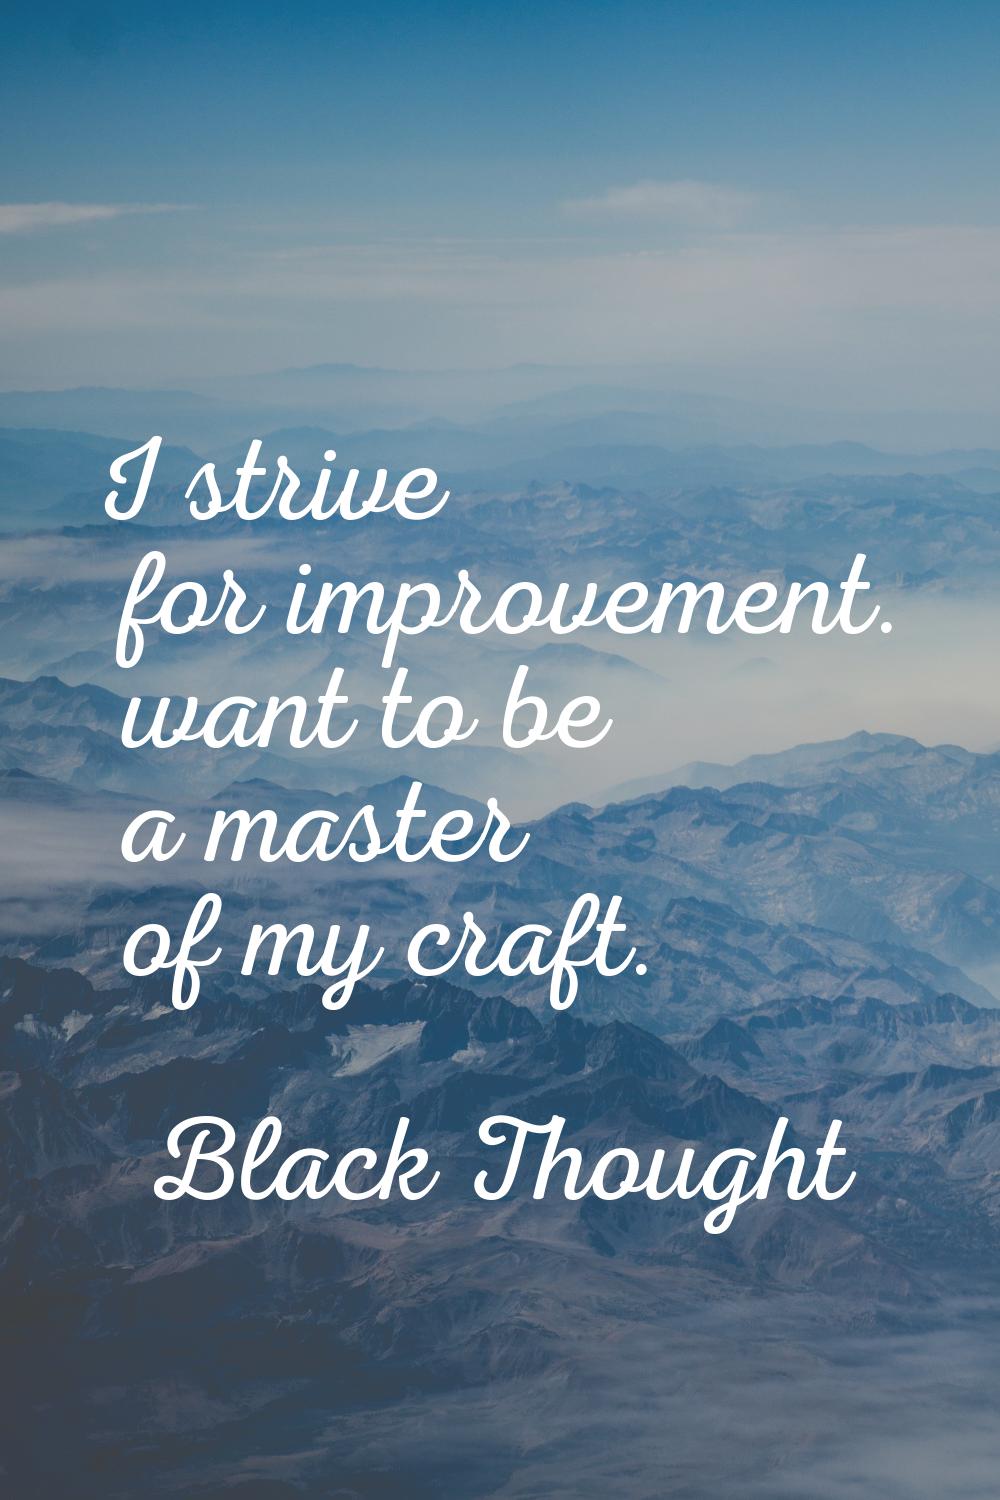 I strive for improvement. want to be a master of my craft.